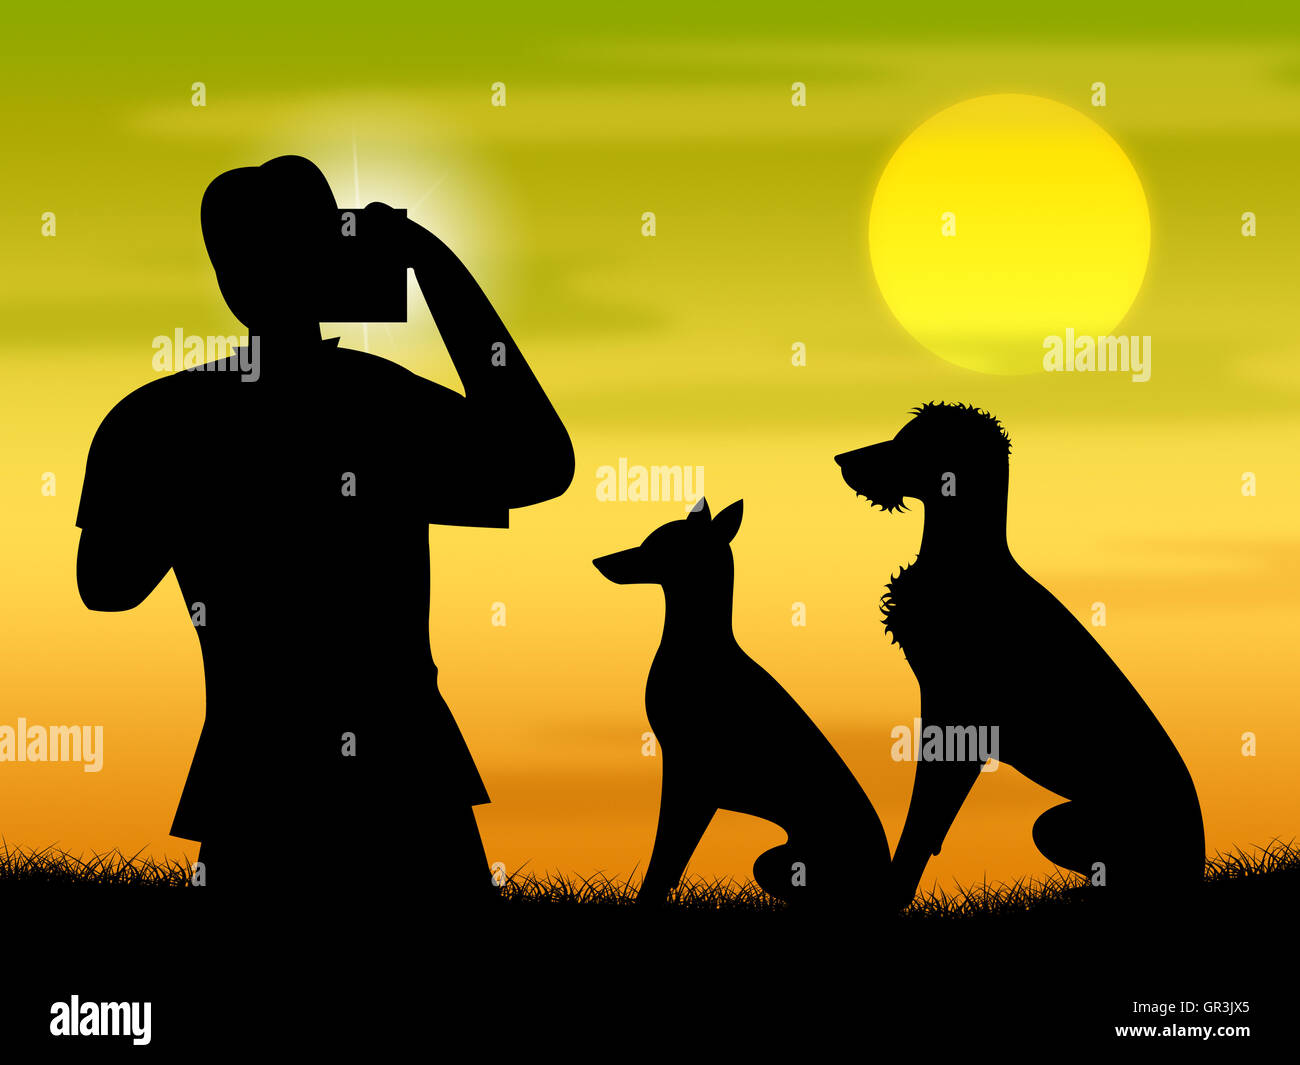 Dogs Photo Representing Camera Photography And Snapshots Stock Photo